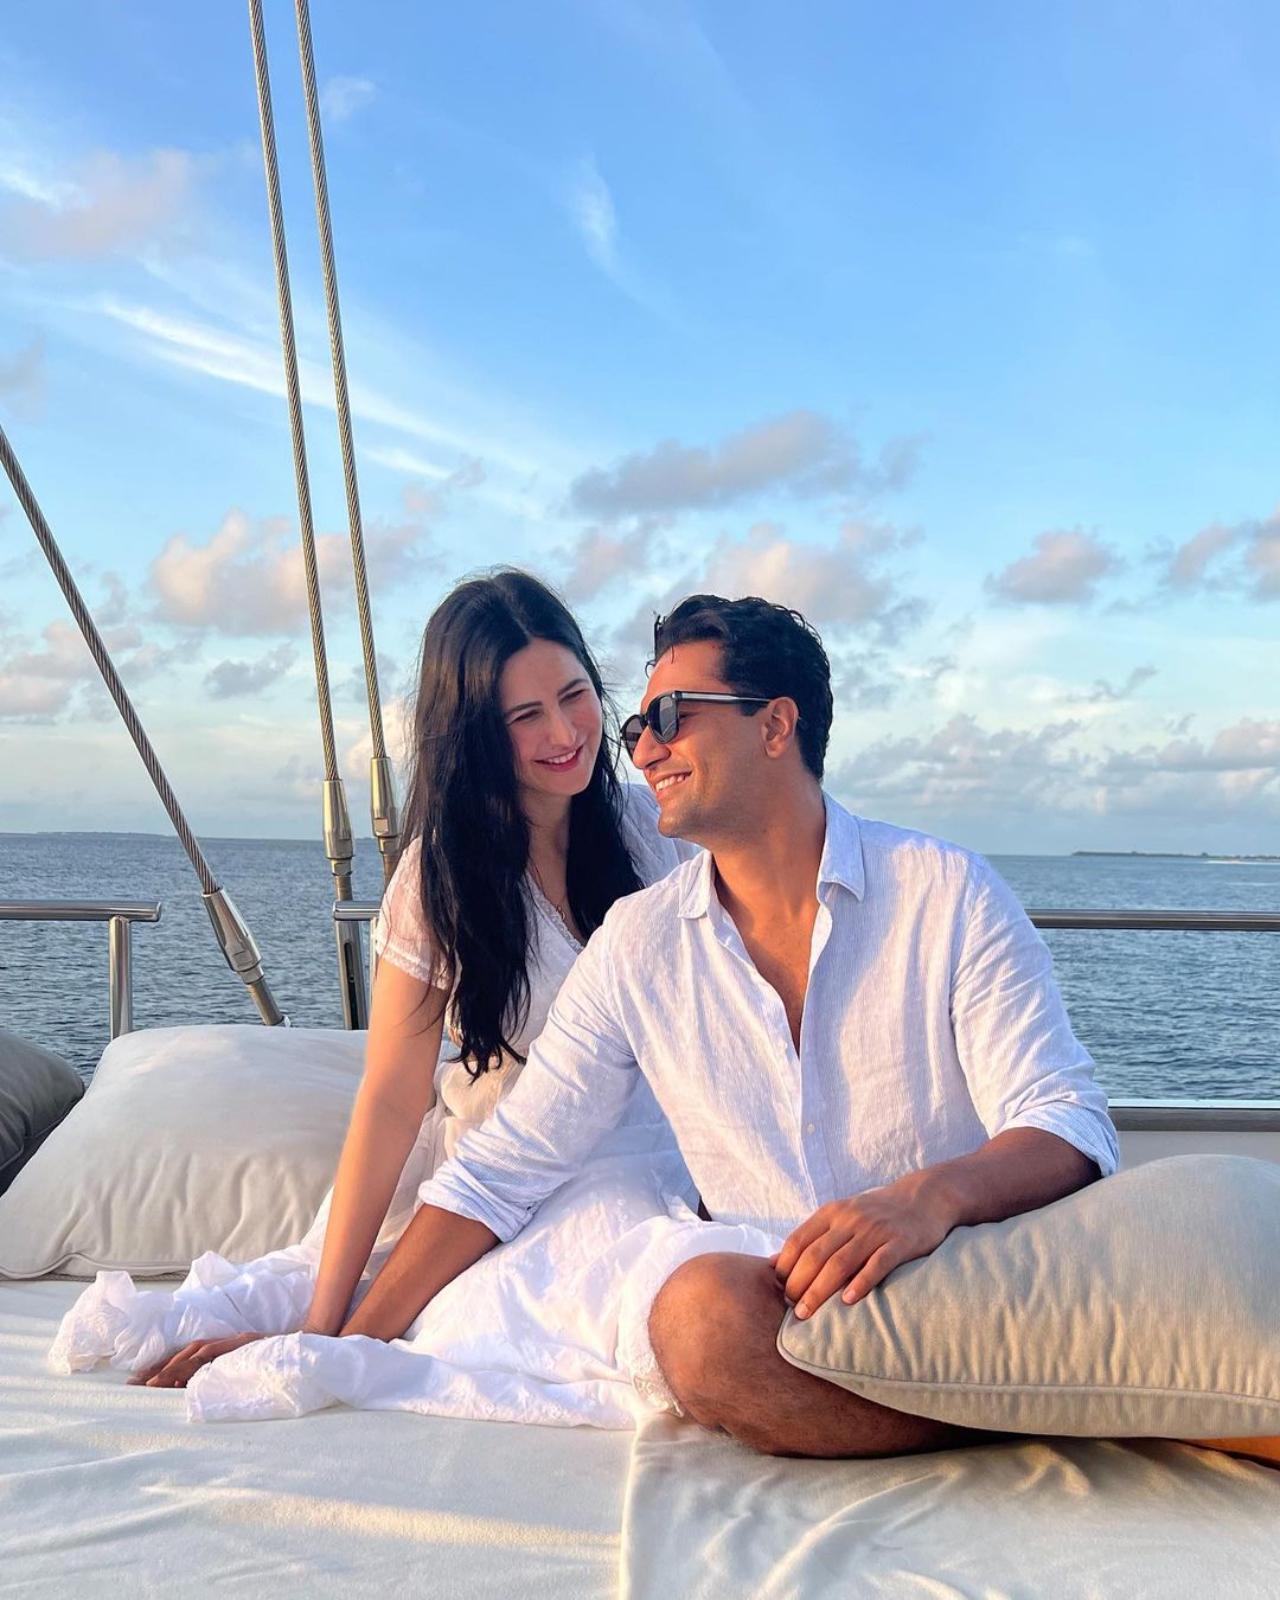 Two days after the birthday, Vicky shared a romantic picture with Katrina. The couple is seen sitting on a yacht dressed in white.